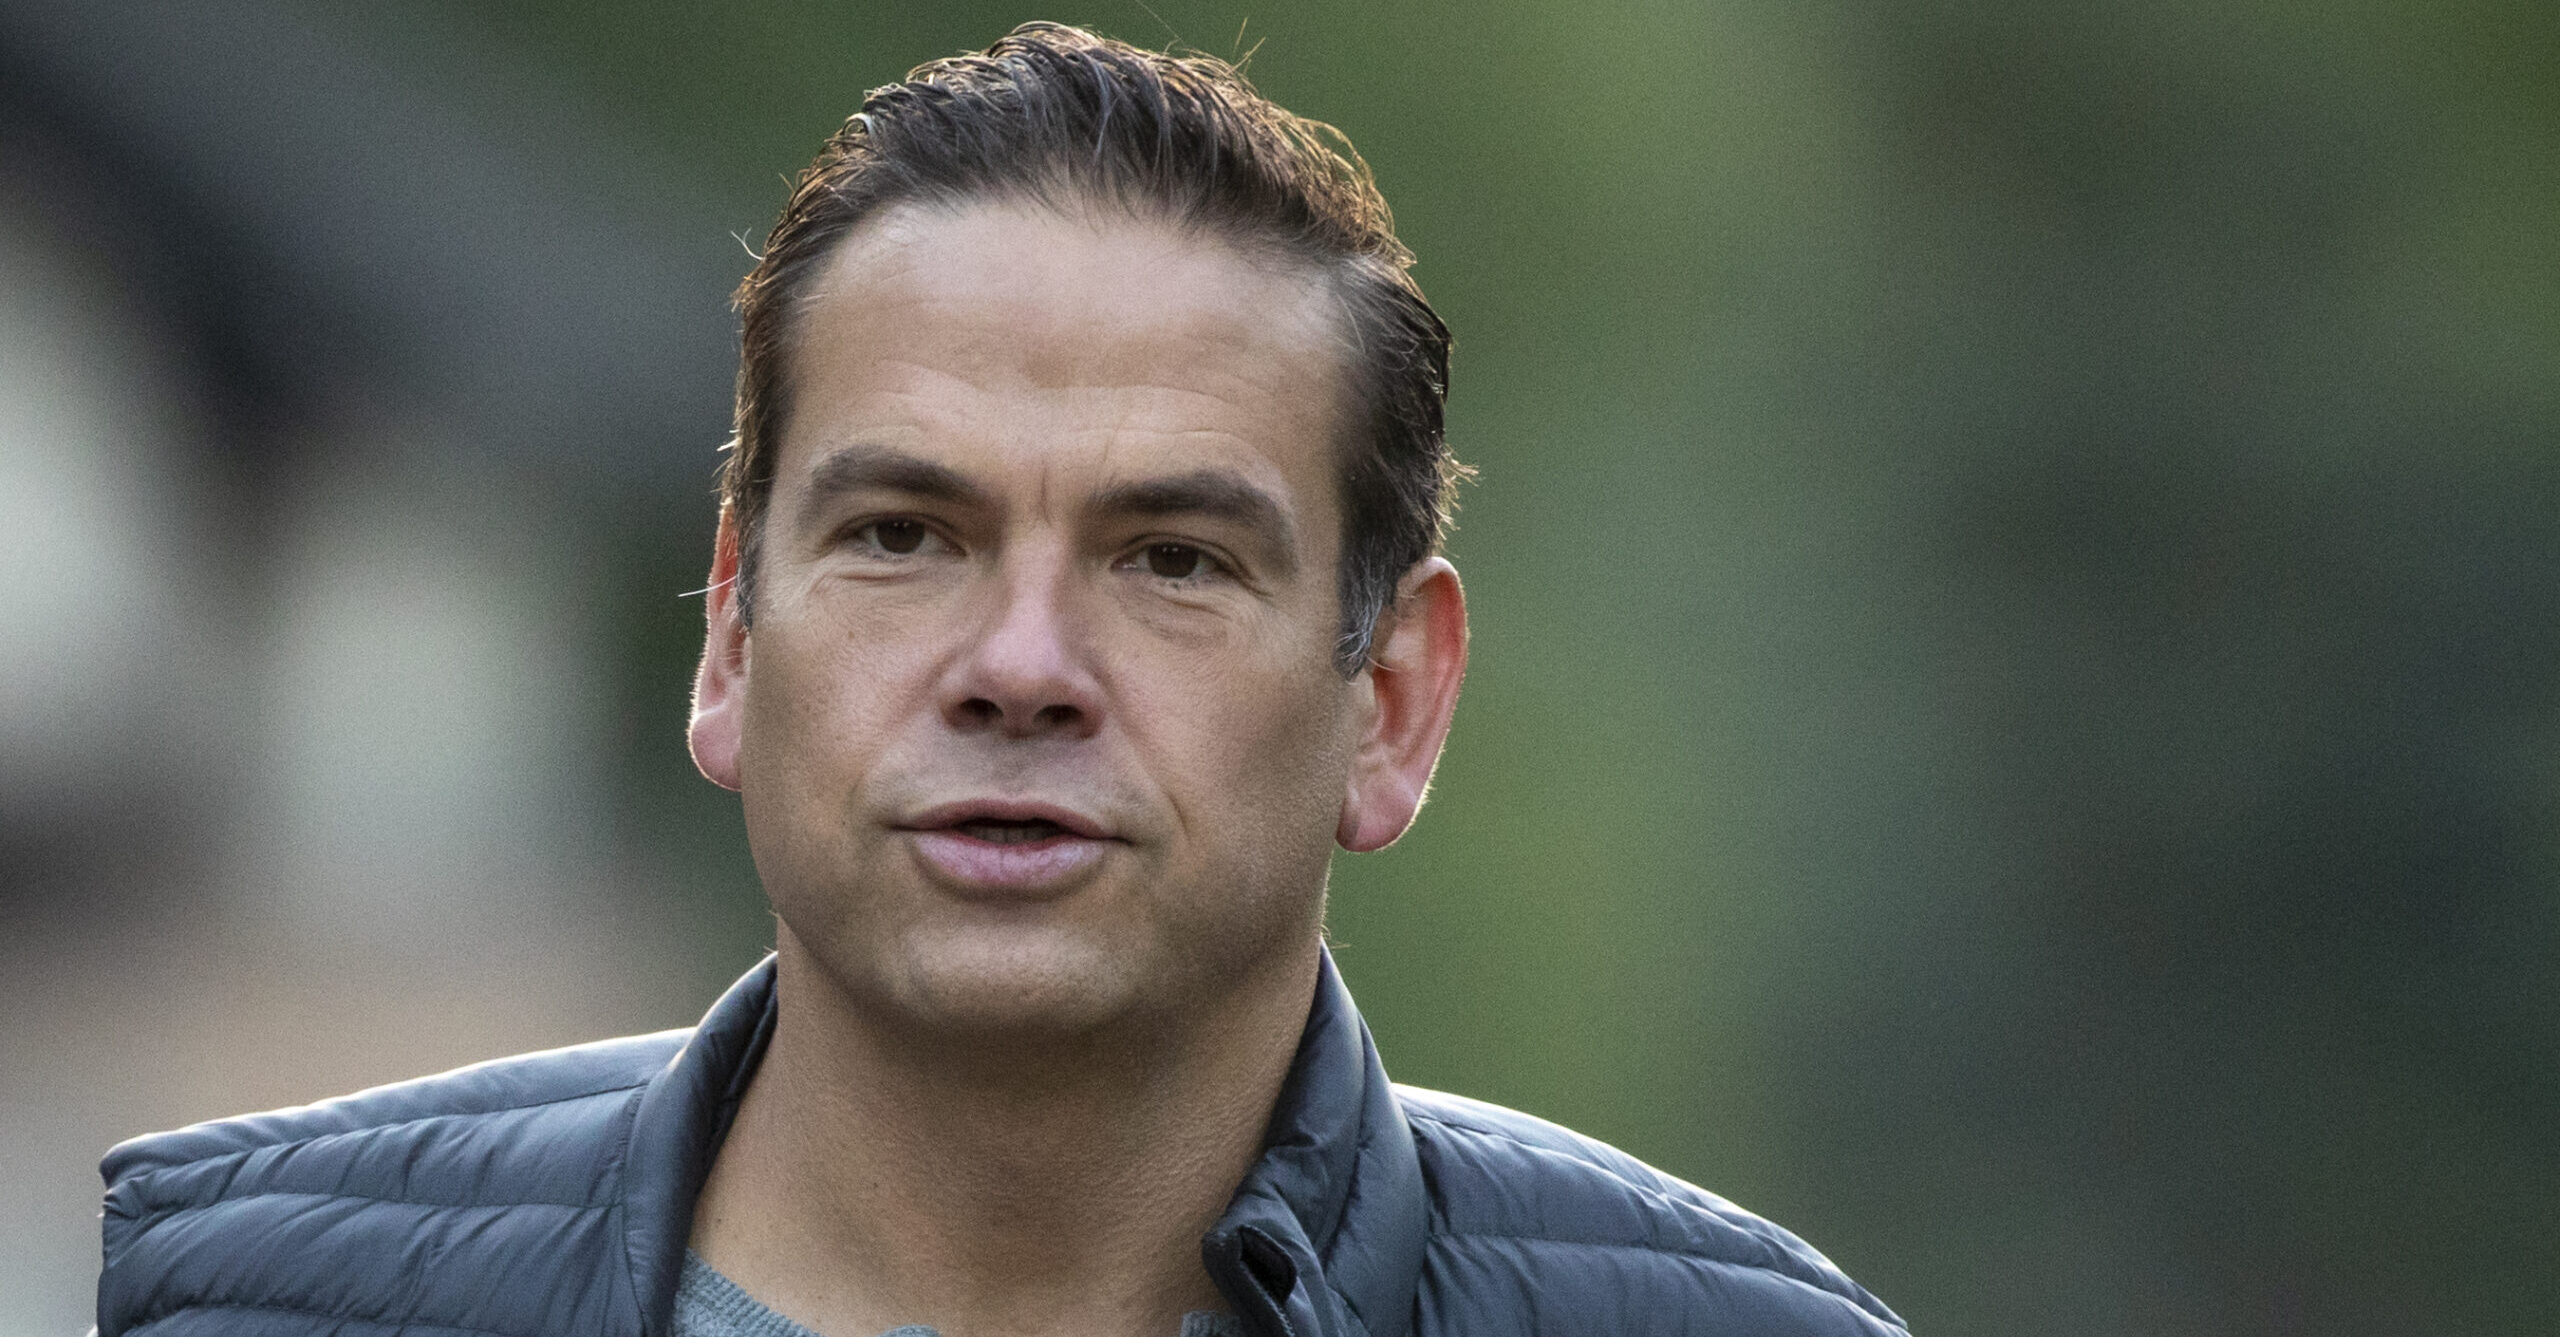 Lachlan Murdoch Views Trump as Bad for America, But Keeps Fox News Behind Him Because It’s Good for Business: Report